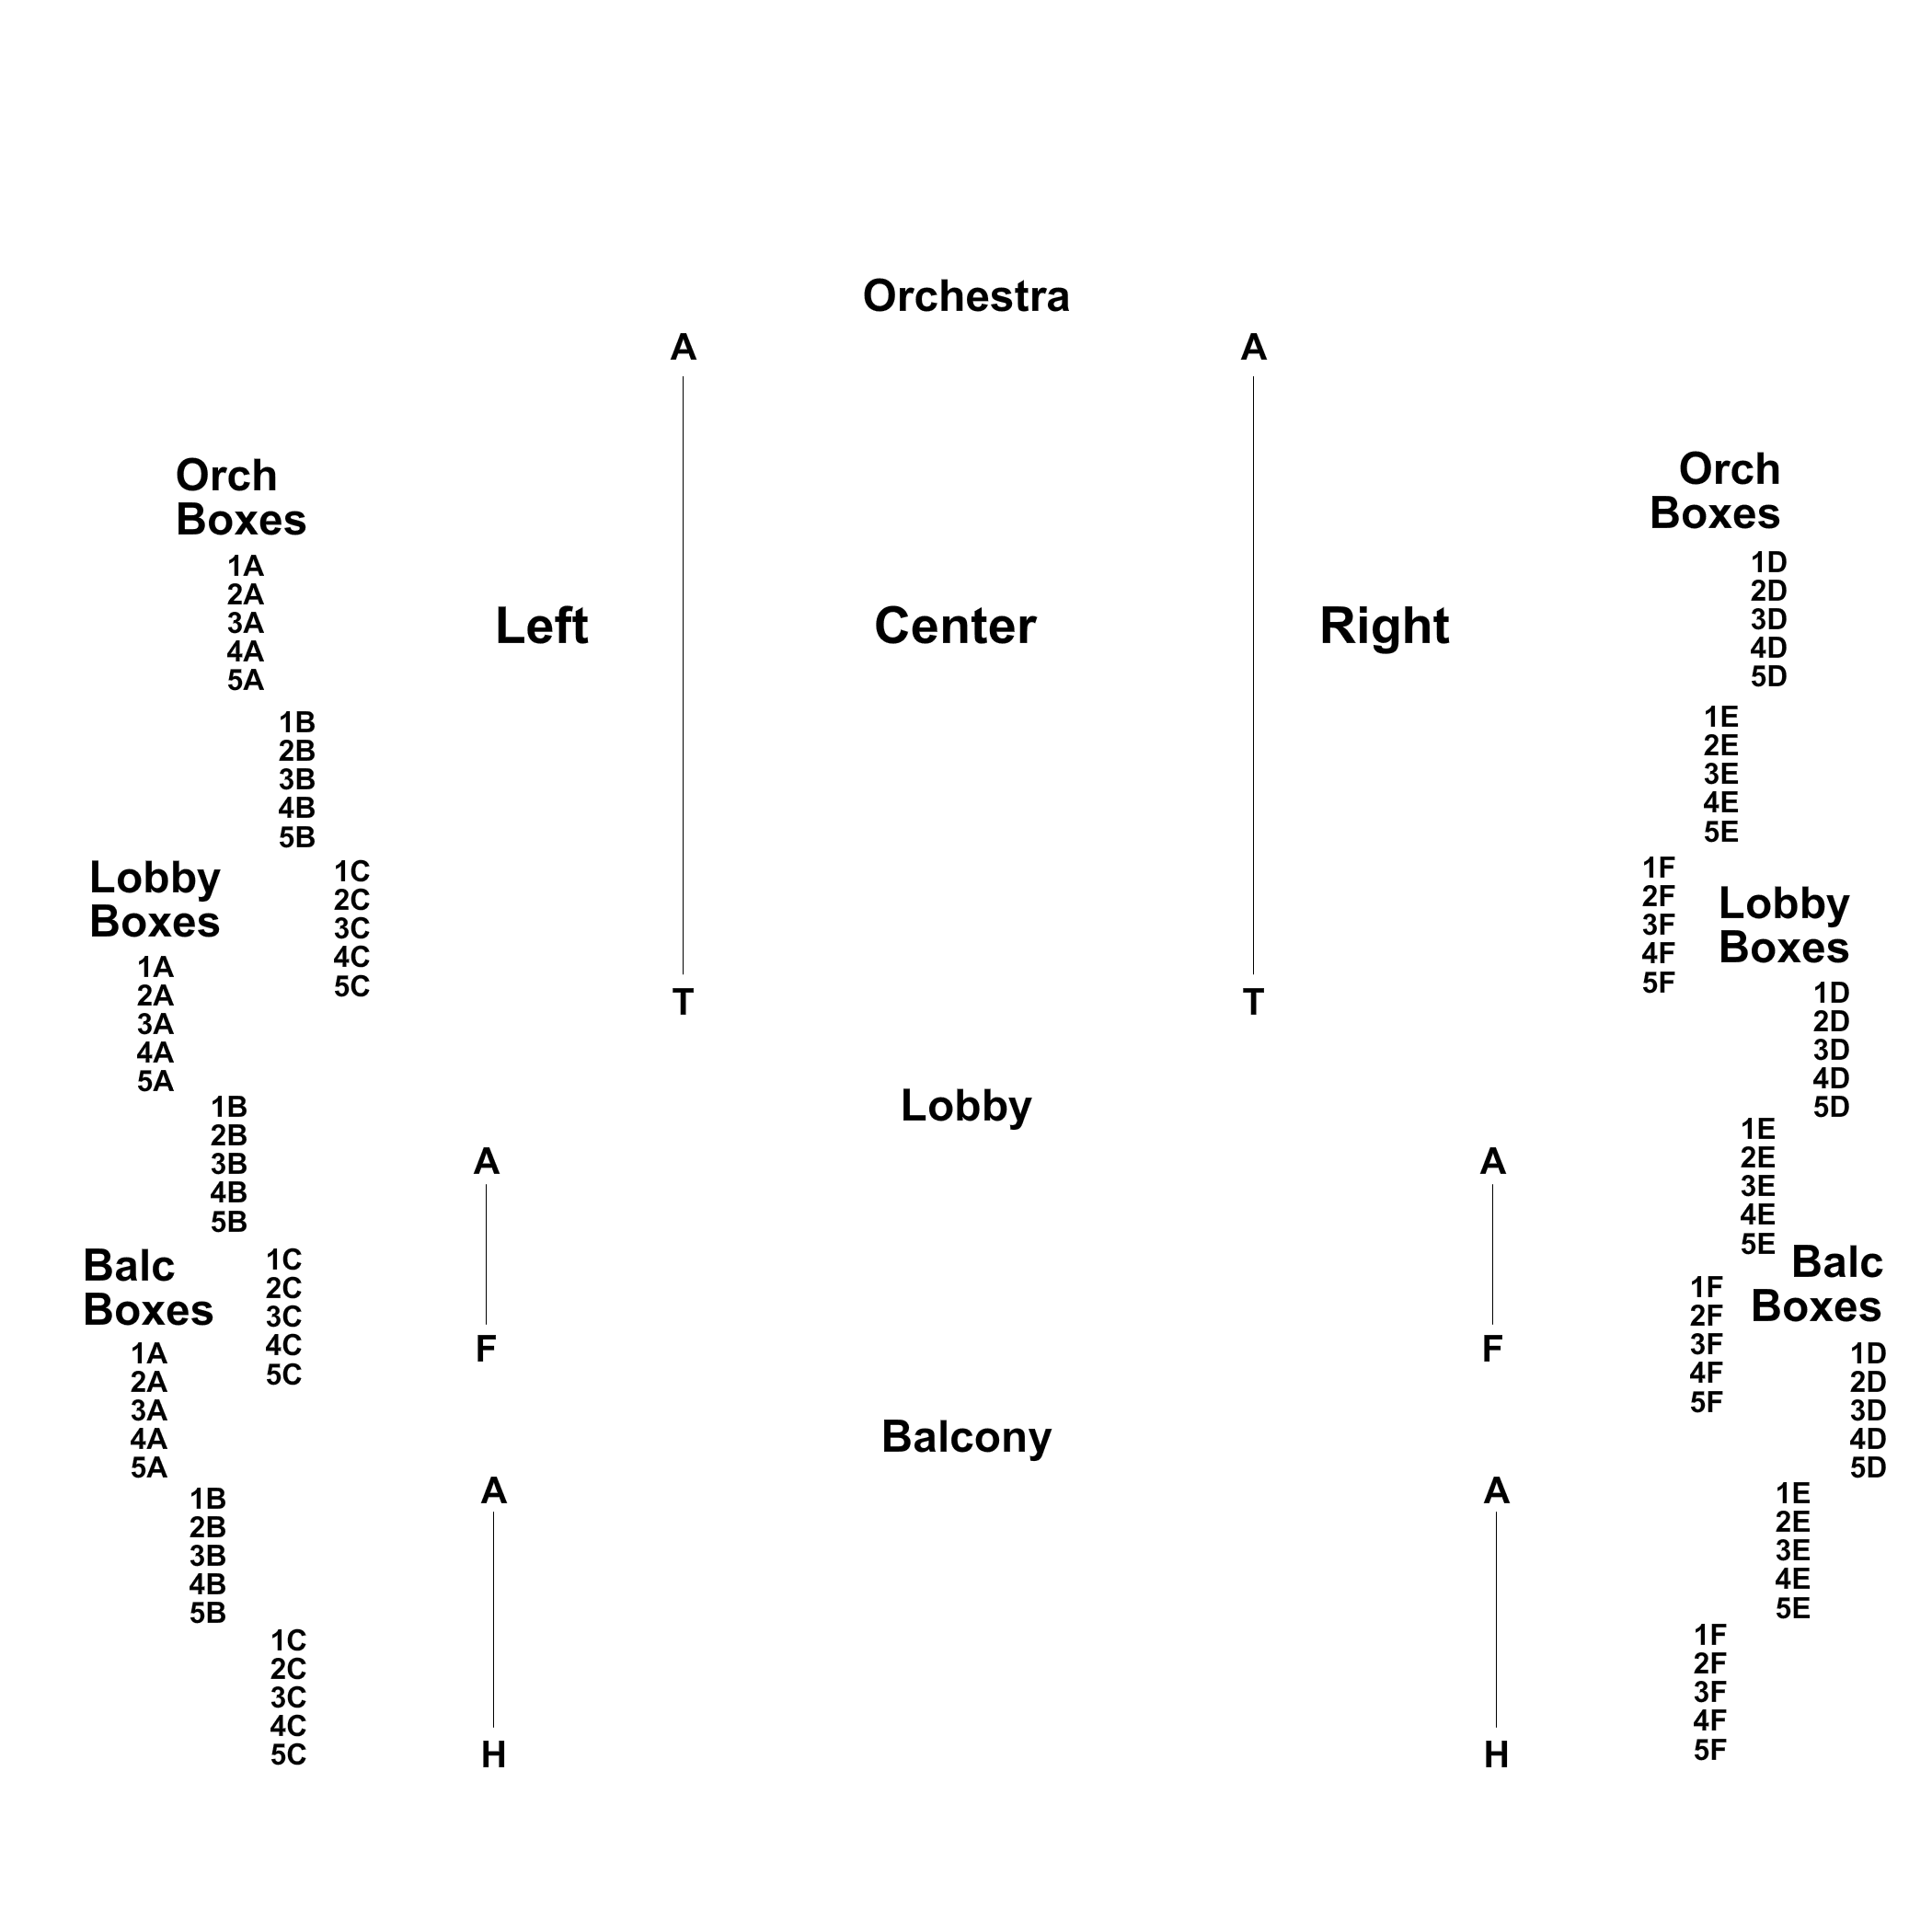 Booth Theatre Tickets & Seating Chart - Event Tickets Center